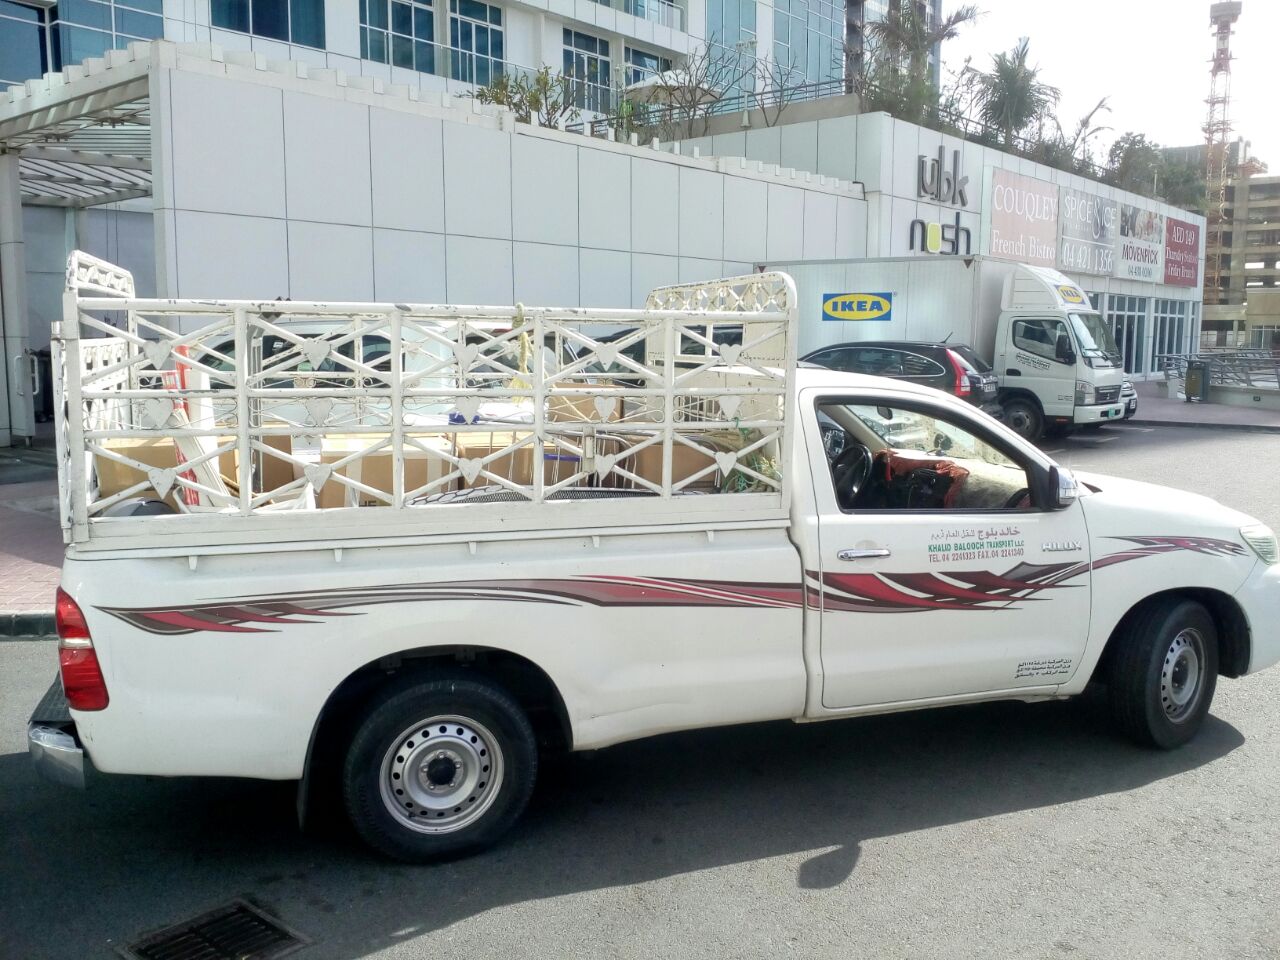 Villa Movers and Packers in Dubai, Packers and Movers in Dubai